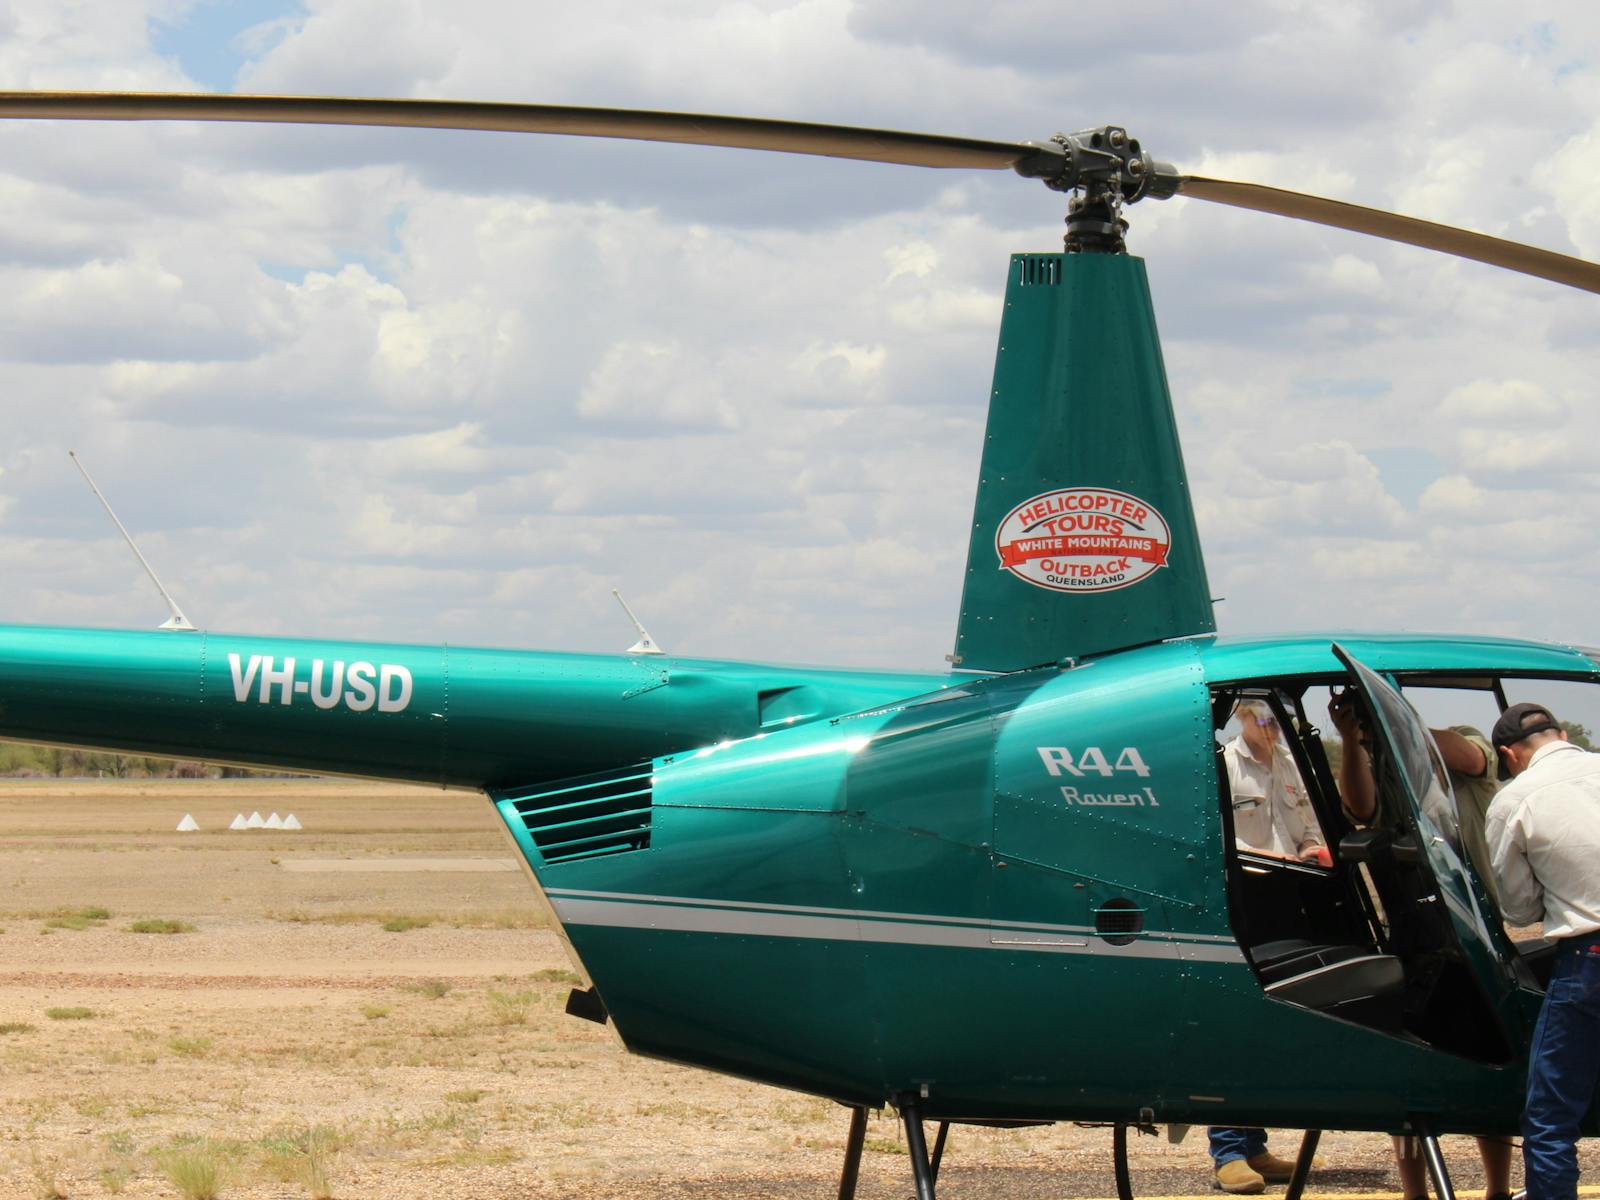 Close up image of the scenic flight helicopter